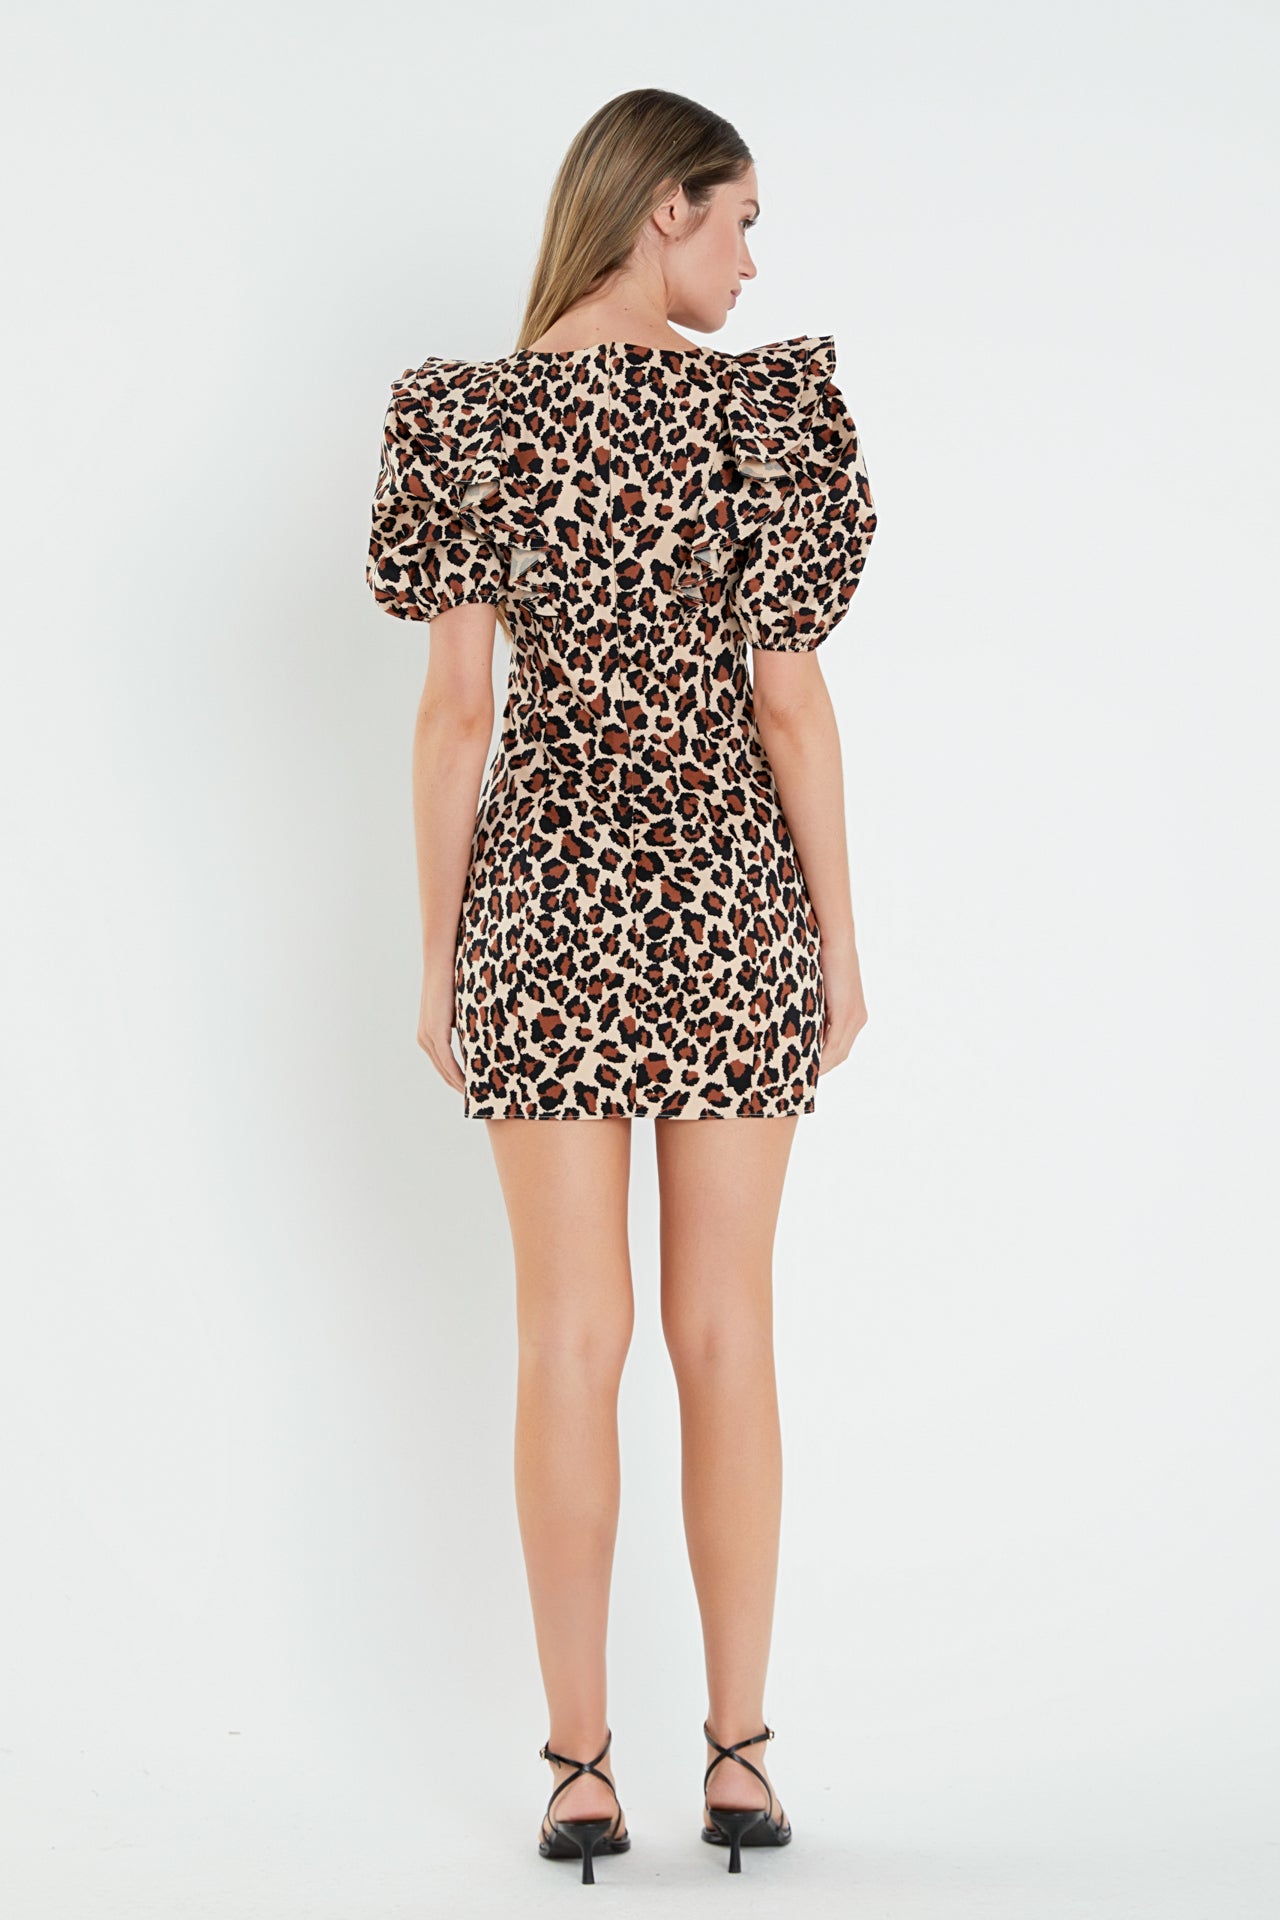 ENGLISH FACTORY - Leopard Mini Dress - DRESSES available at Objectrare